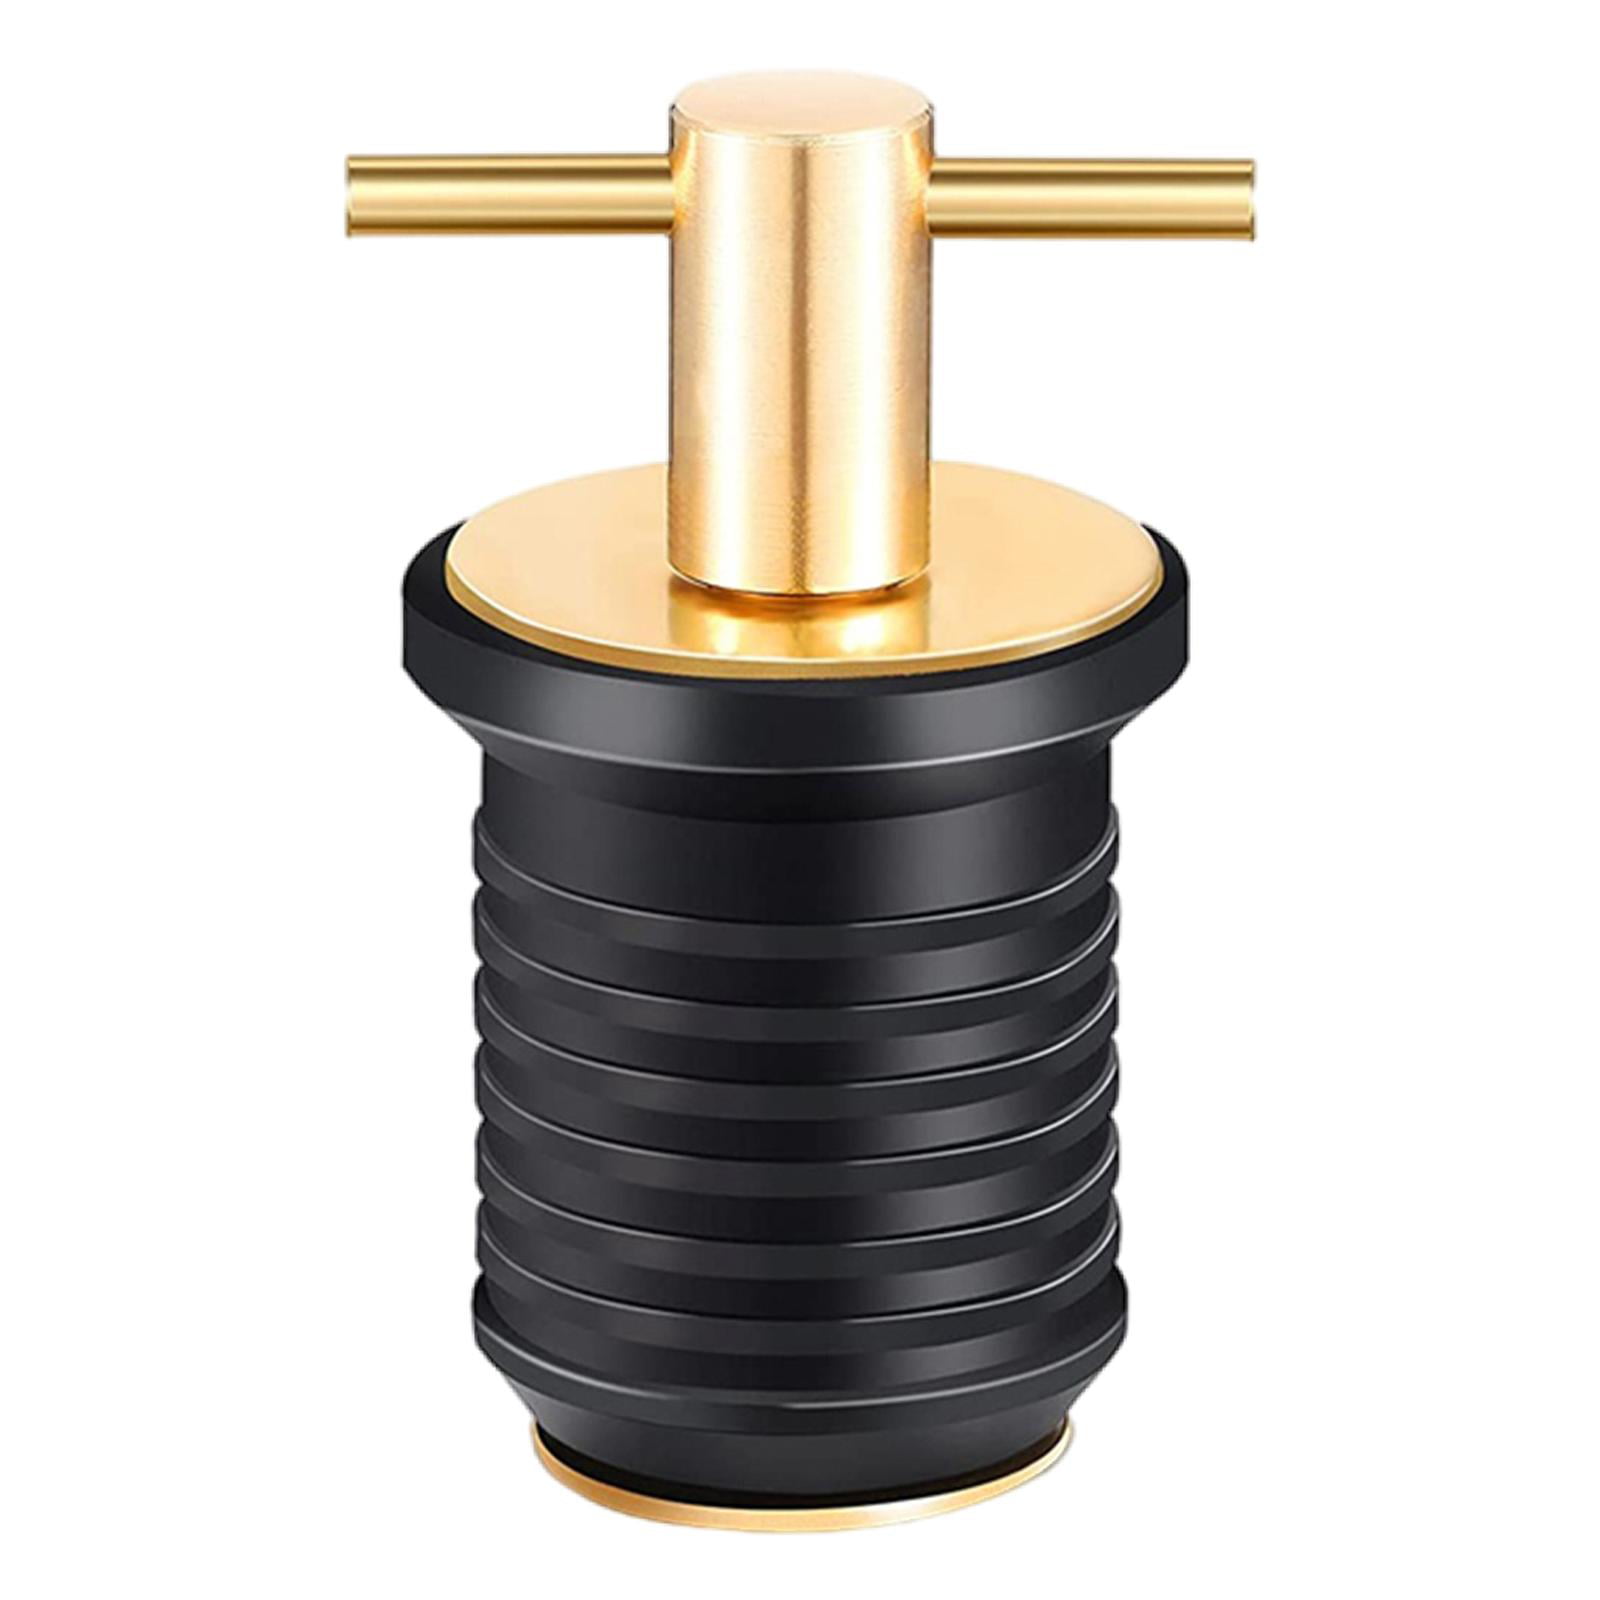 MagiDeal Marine Boat Drain Plug 3/4' or 1-1/4' Drain Stopper for 19mm 32mm Hole Kayaking 